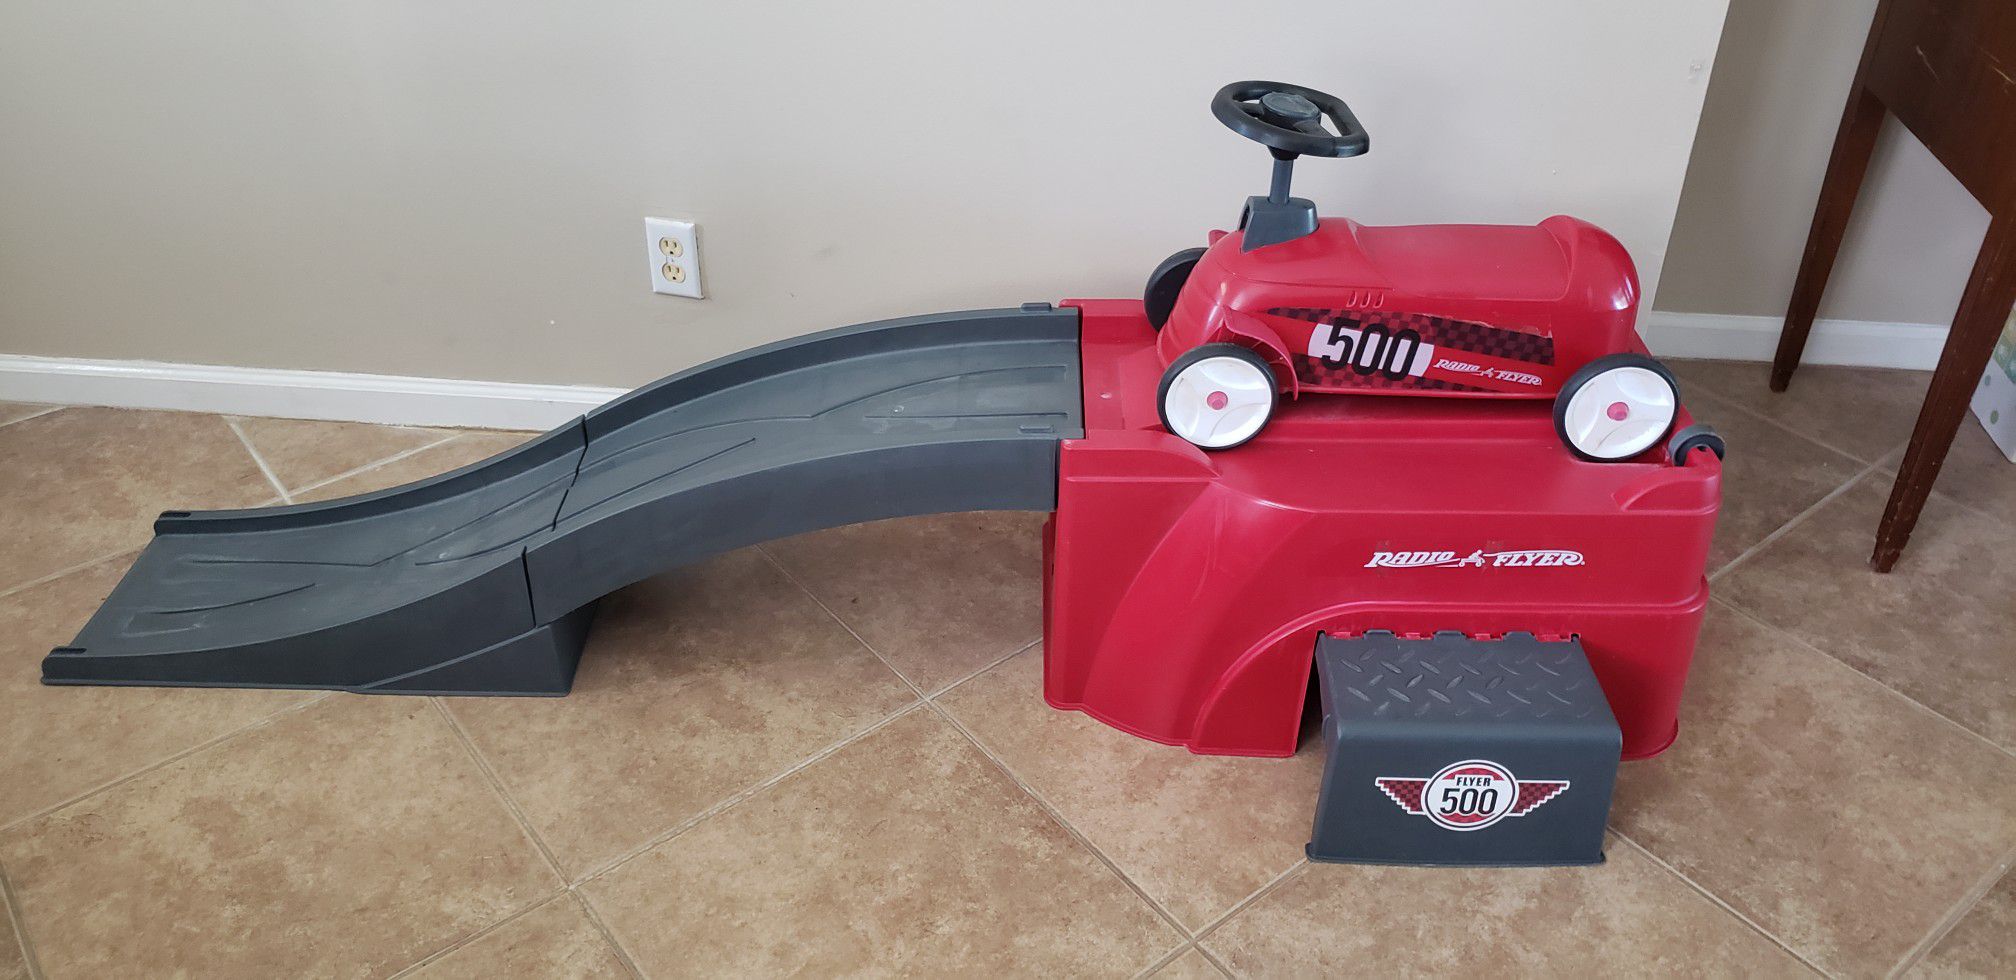 Radio Flyer 500 ride-on with Ramp